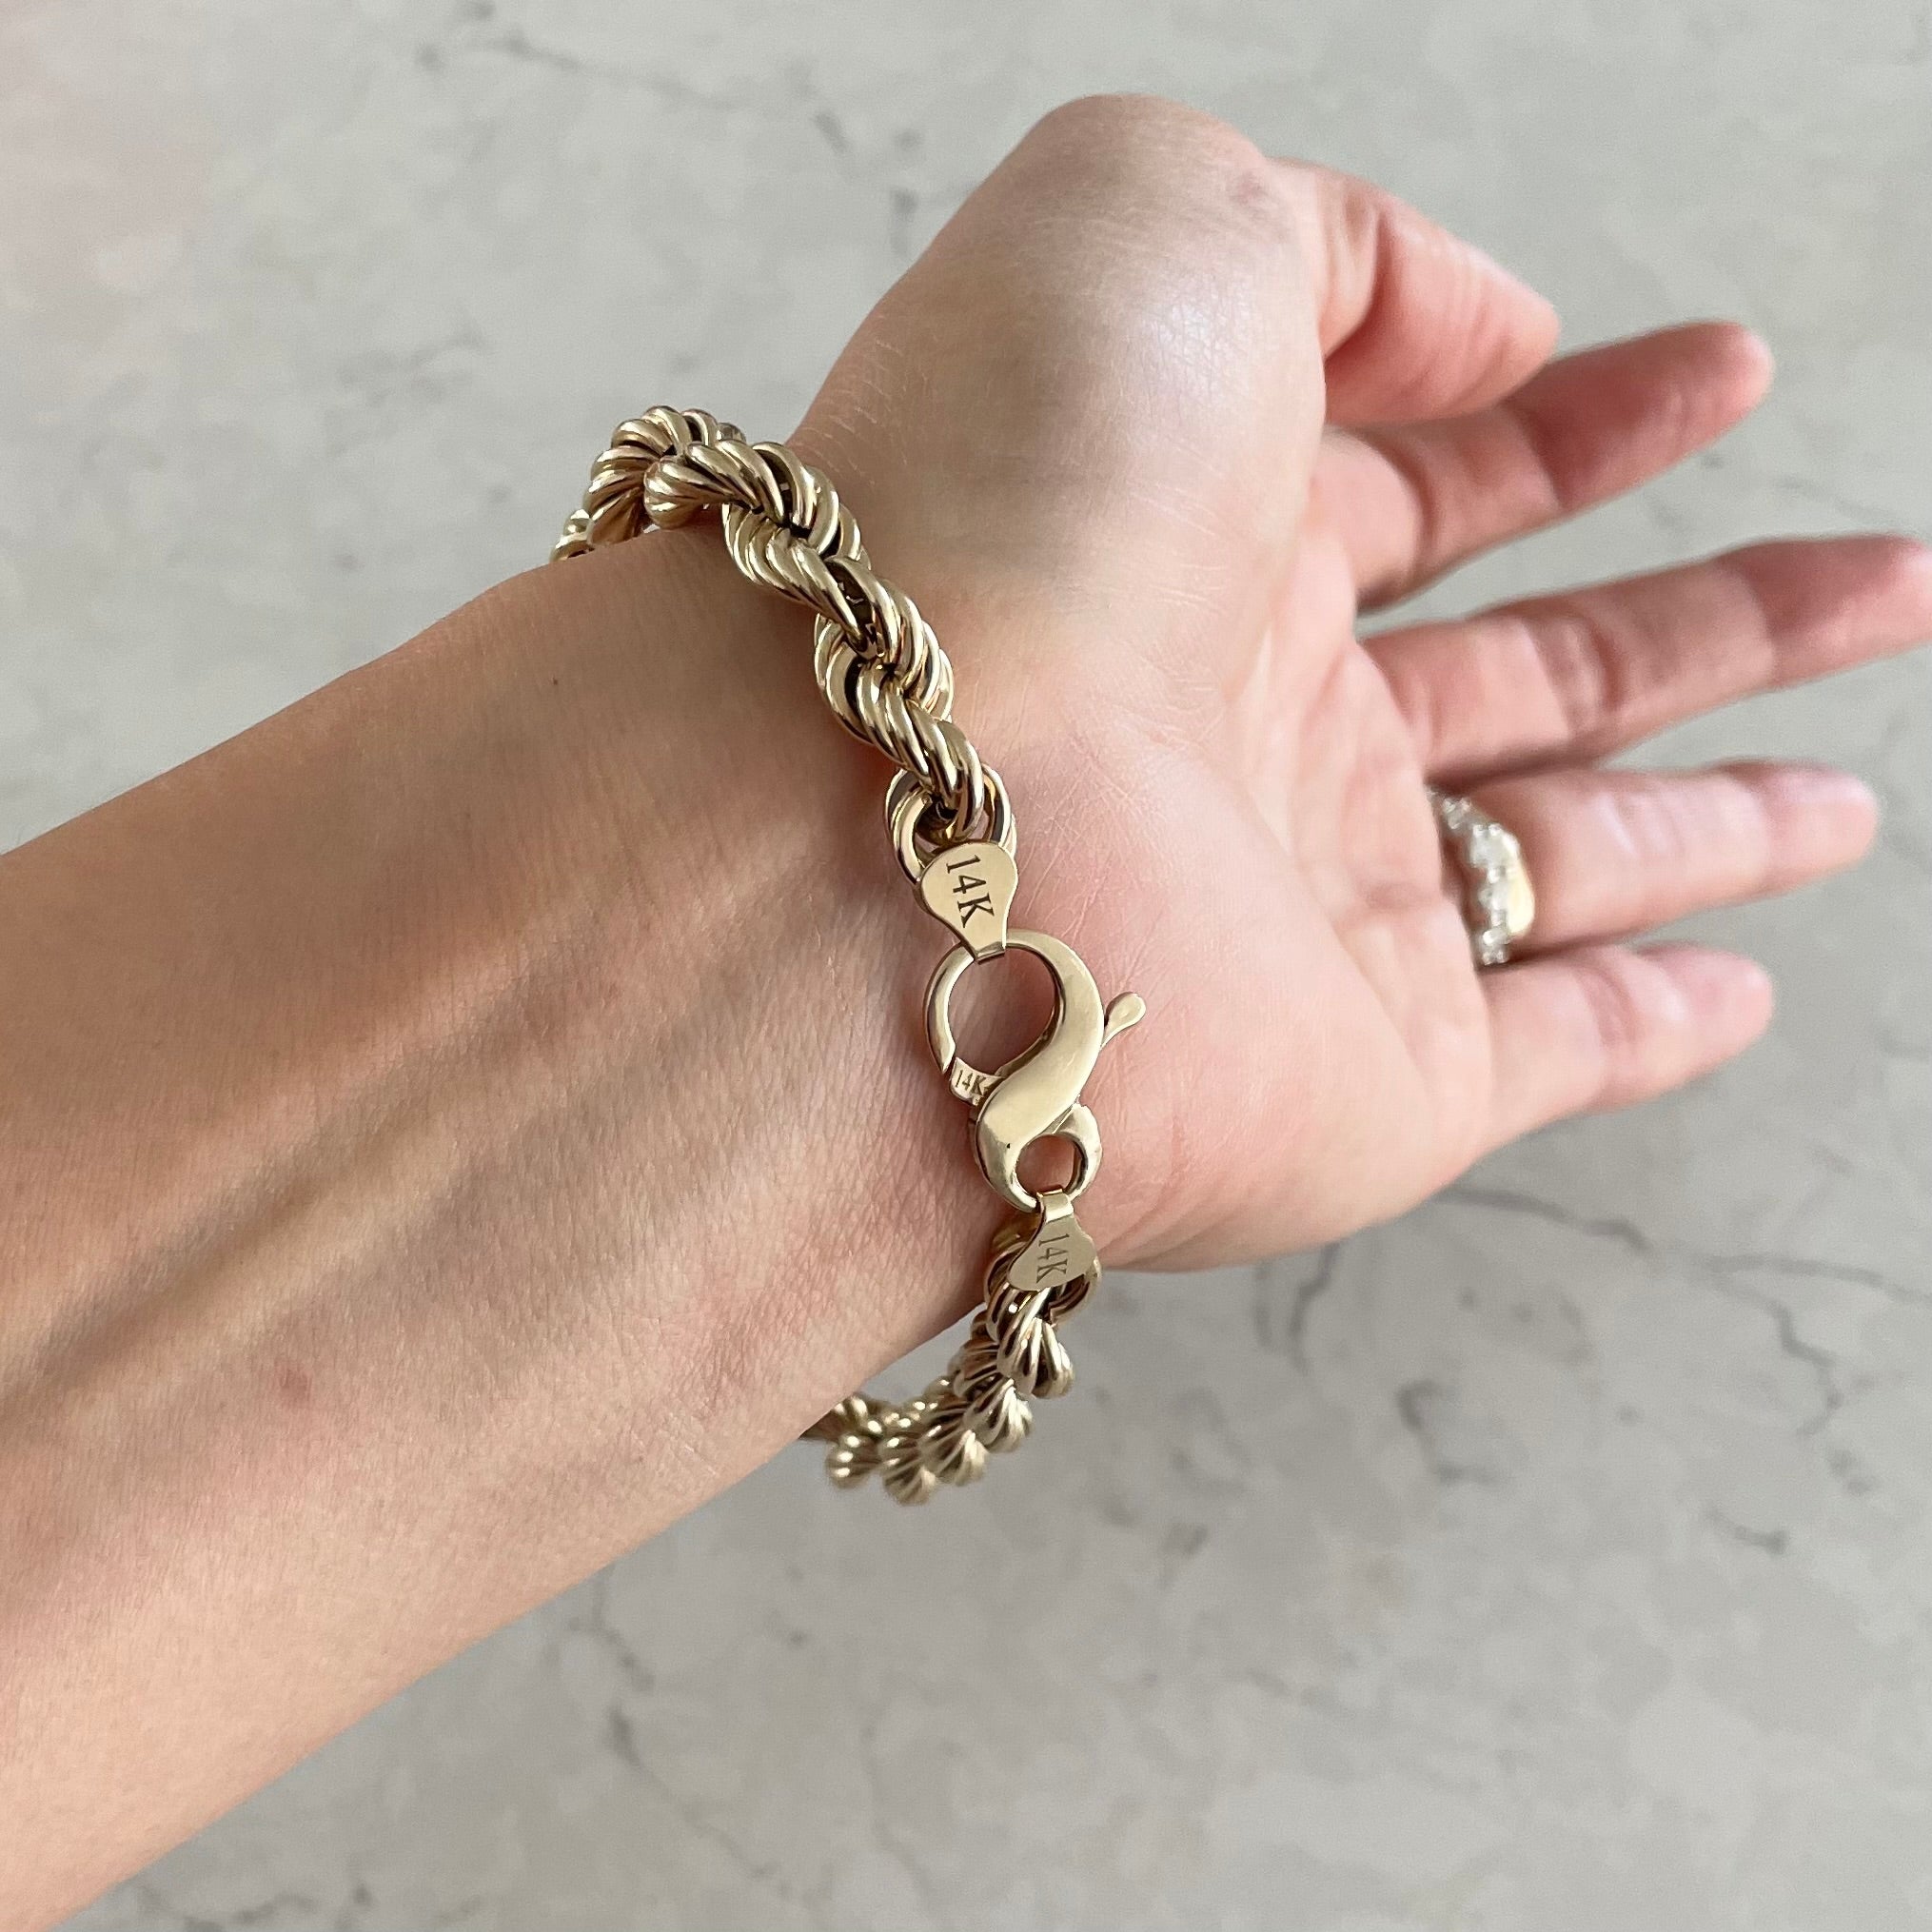 14k solid yellow gold rope chain bracelet